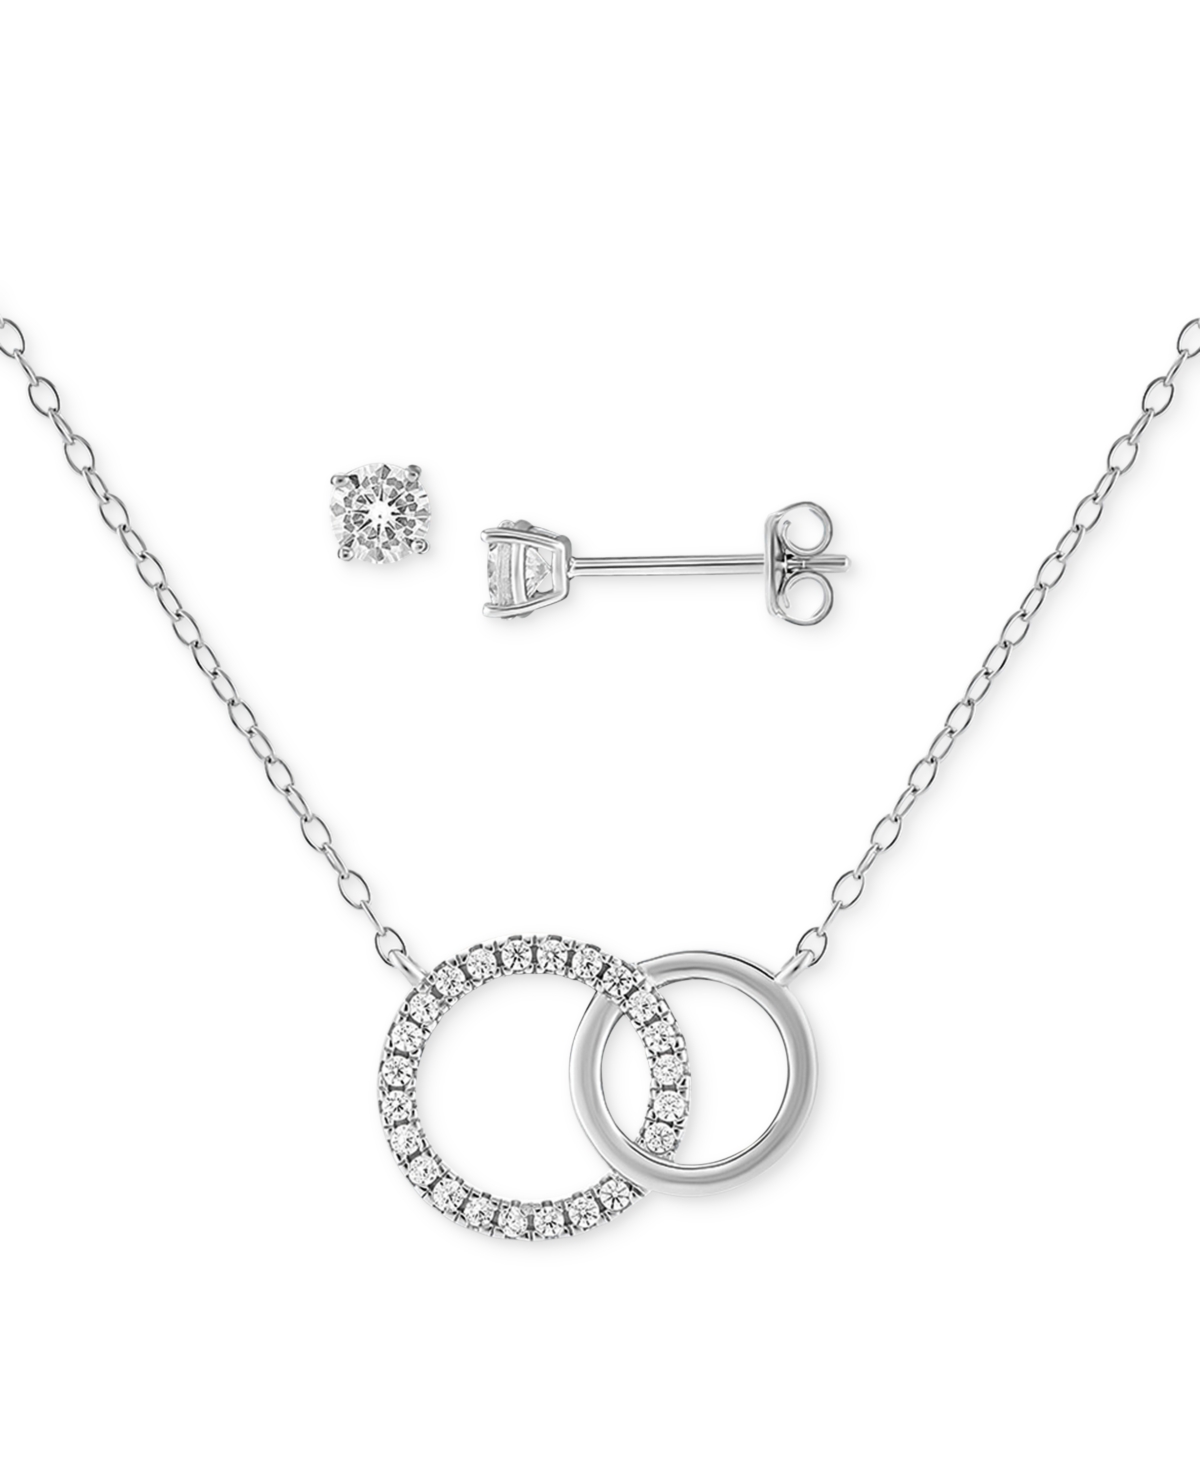 2-Pc. Set Cubic Zirconia Interlocking Rings Pendant Necklace & Complementing Stud Earrings in Sterling Silver, Created for Macy's - Ster